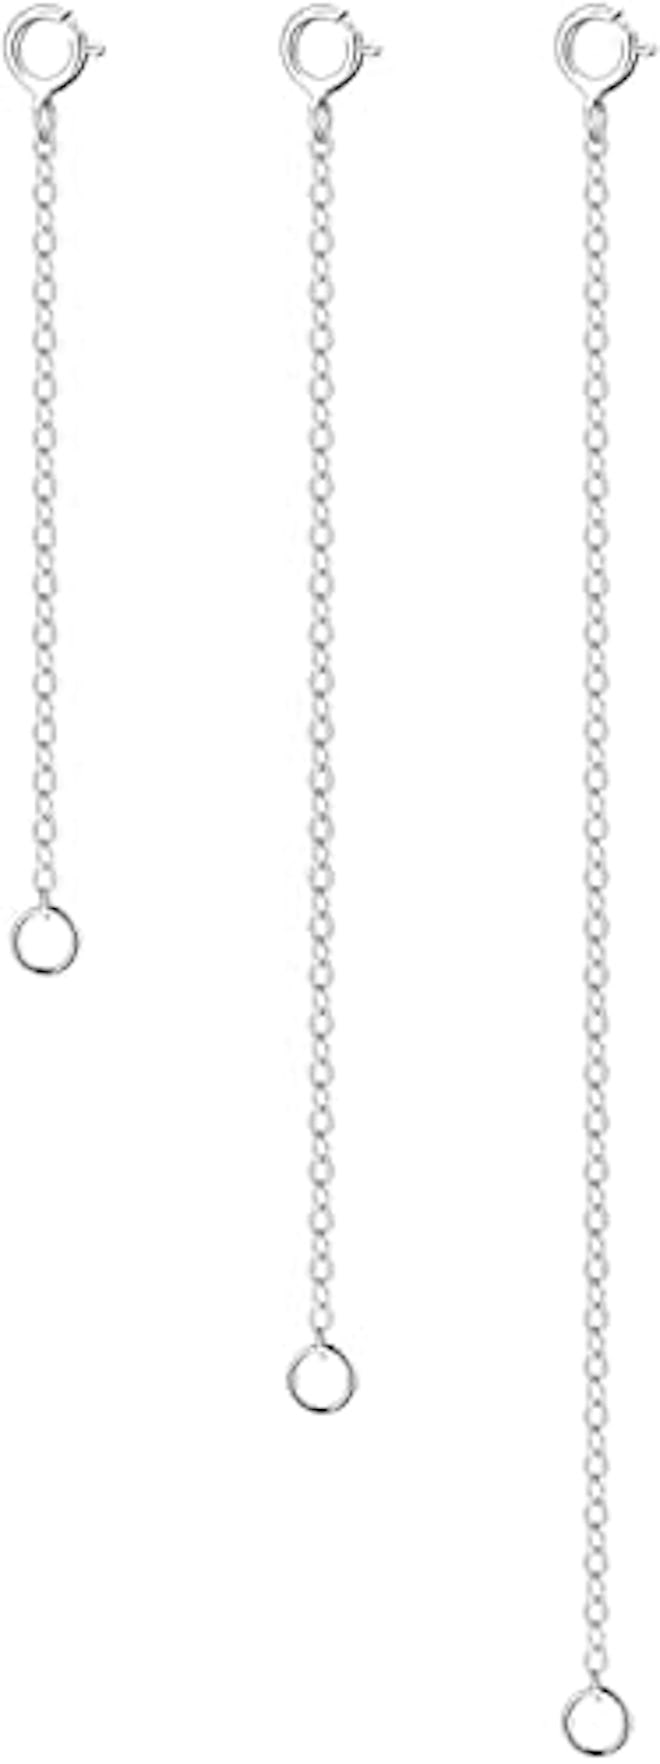 LANCHARMED Sterling Silver Necklace Extenders (Set of 3)